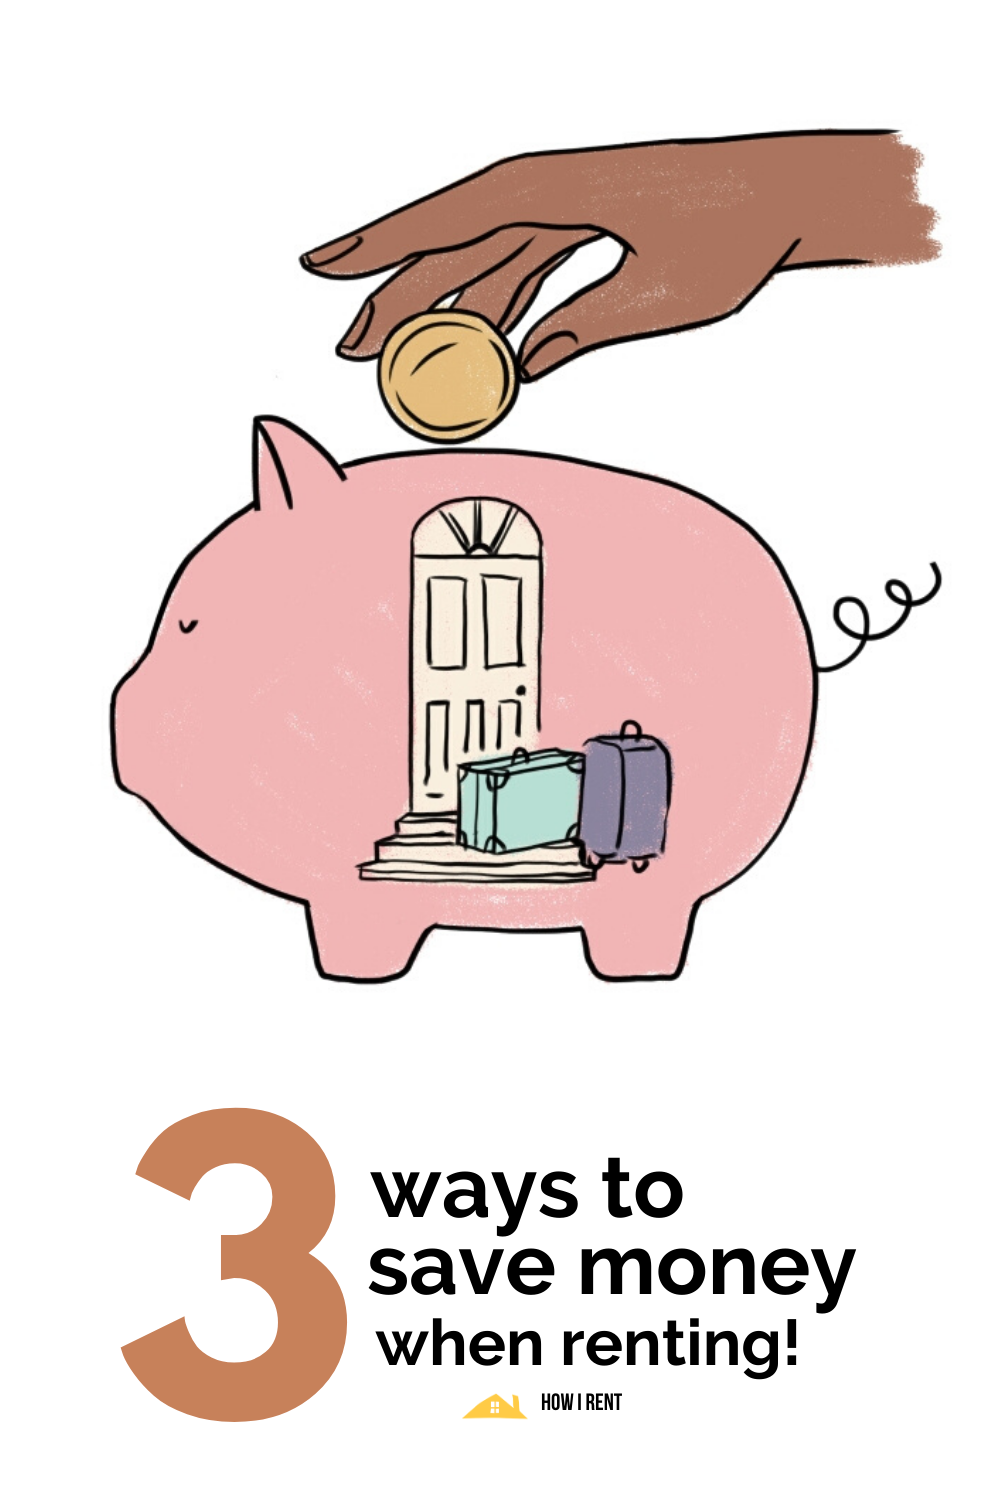 Image of a brown hand putting money into a pigy bank 